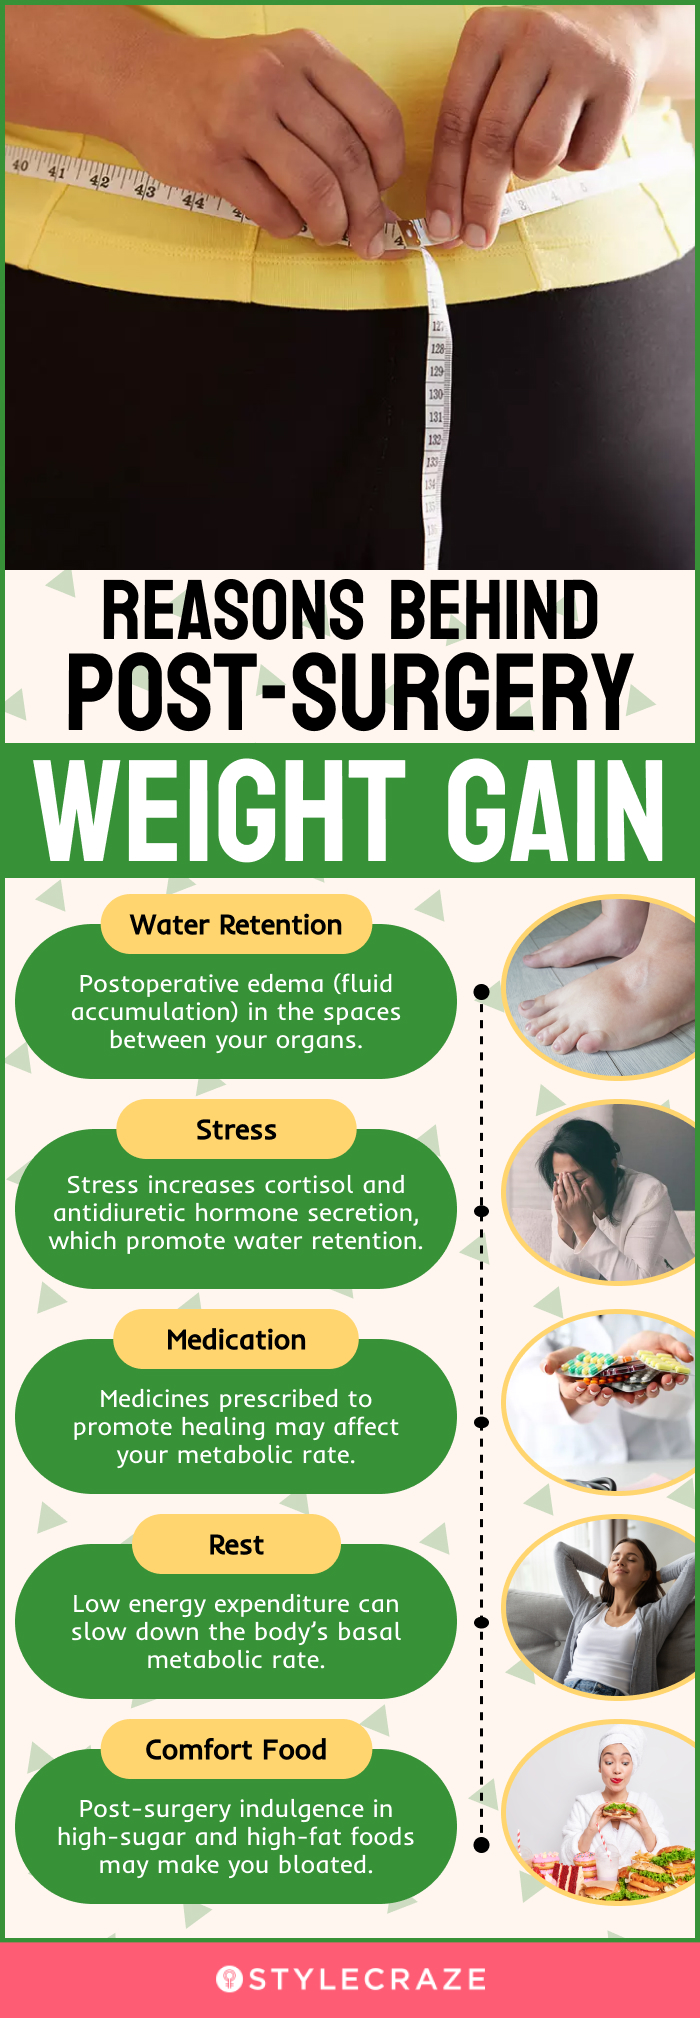 reasons behind post surgery weight gain (infographic)